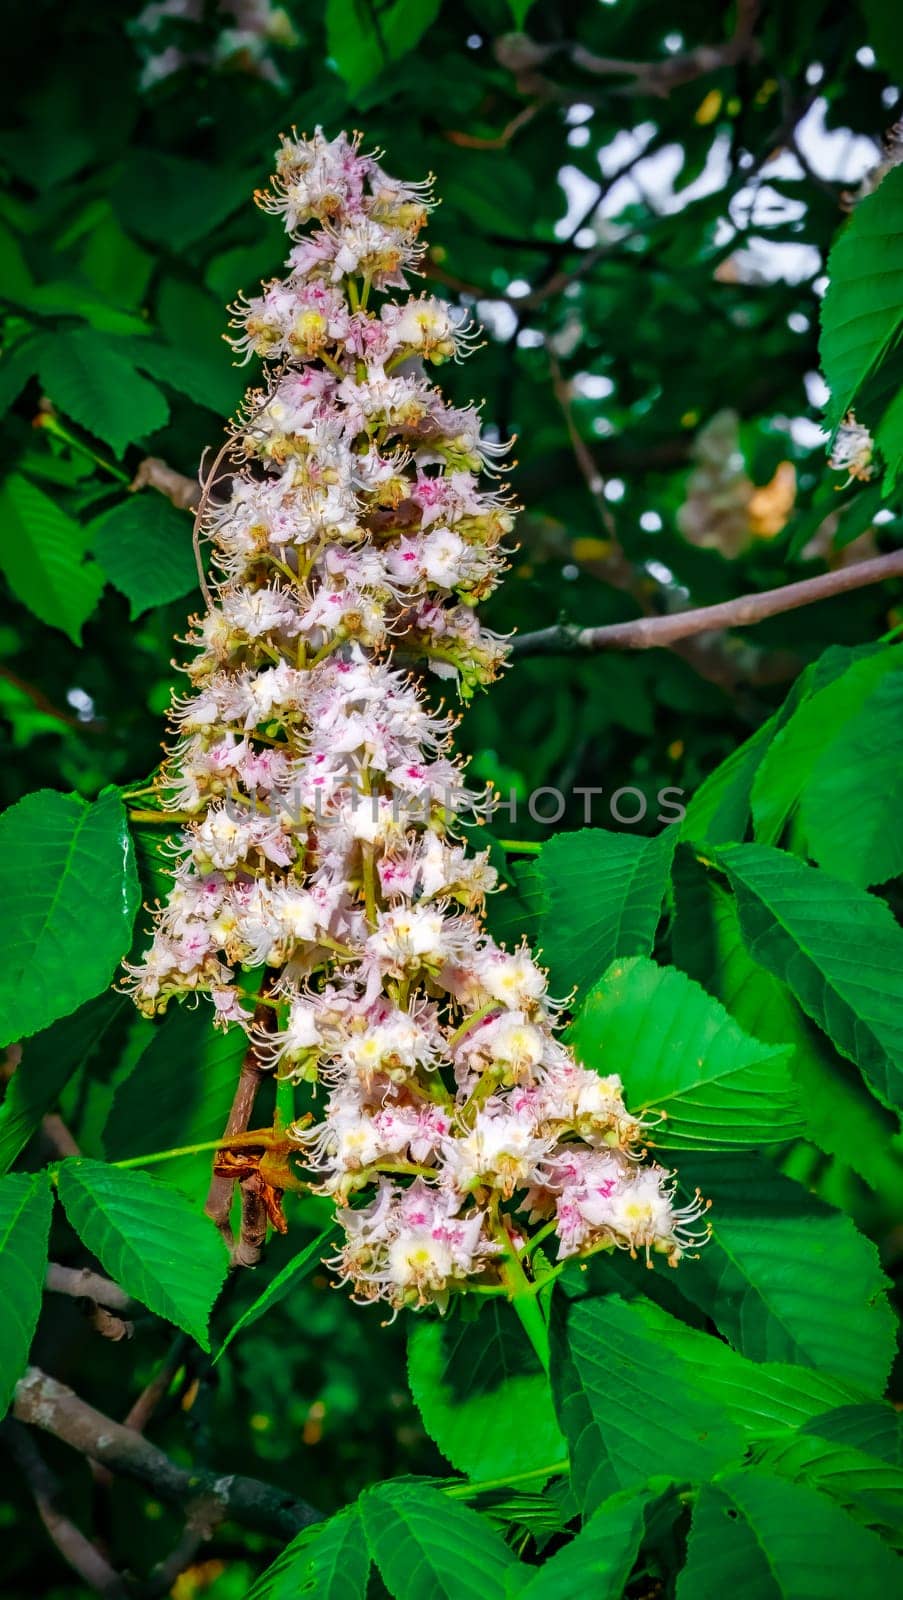 Chestnuts blooming flowers on the green branches. Spring season trees and plants. color nature by lempro